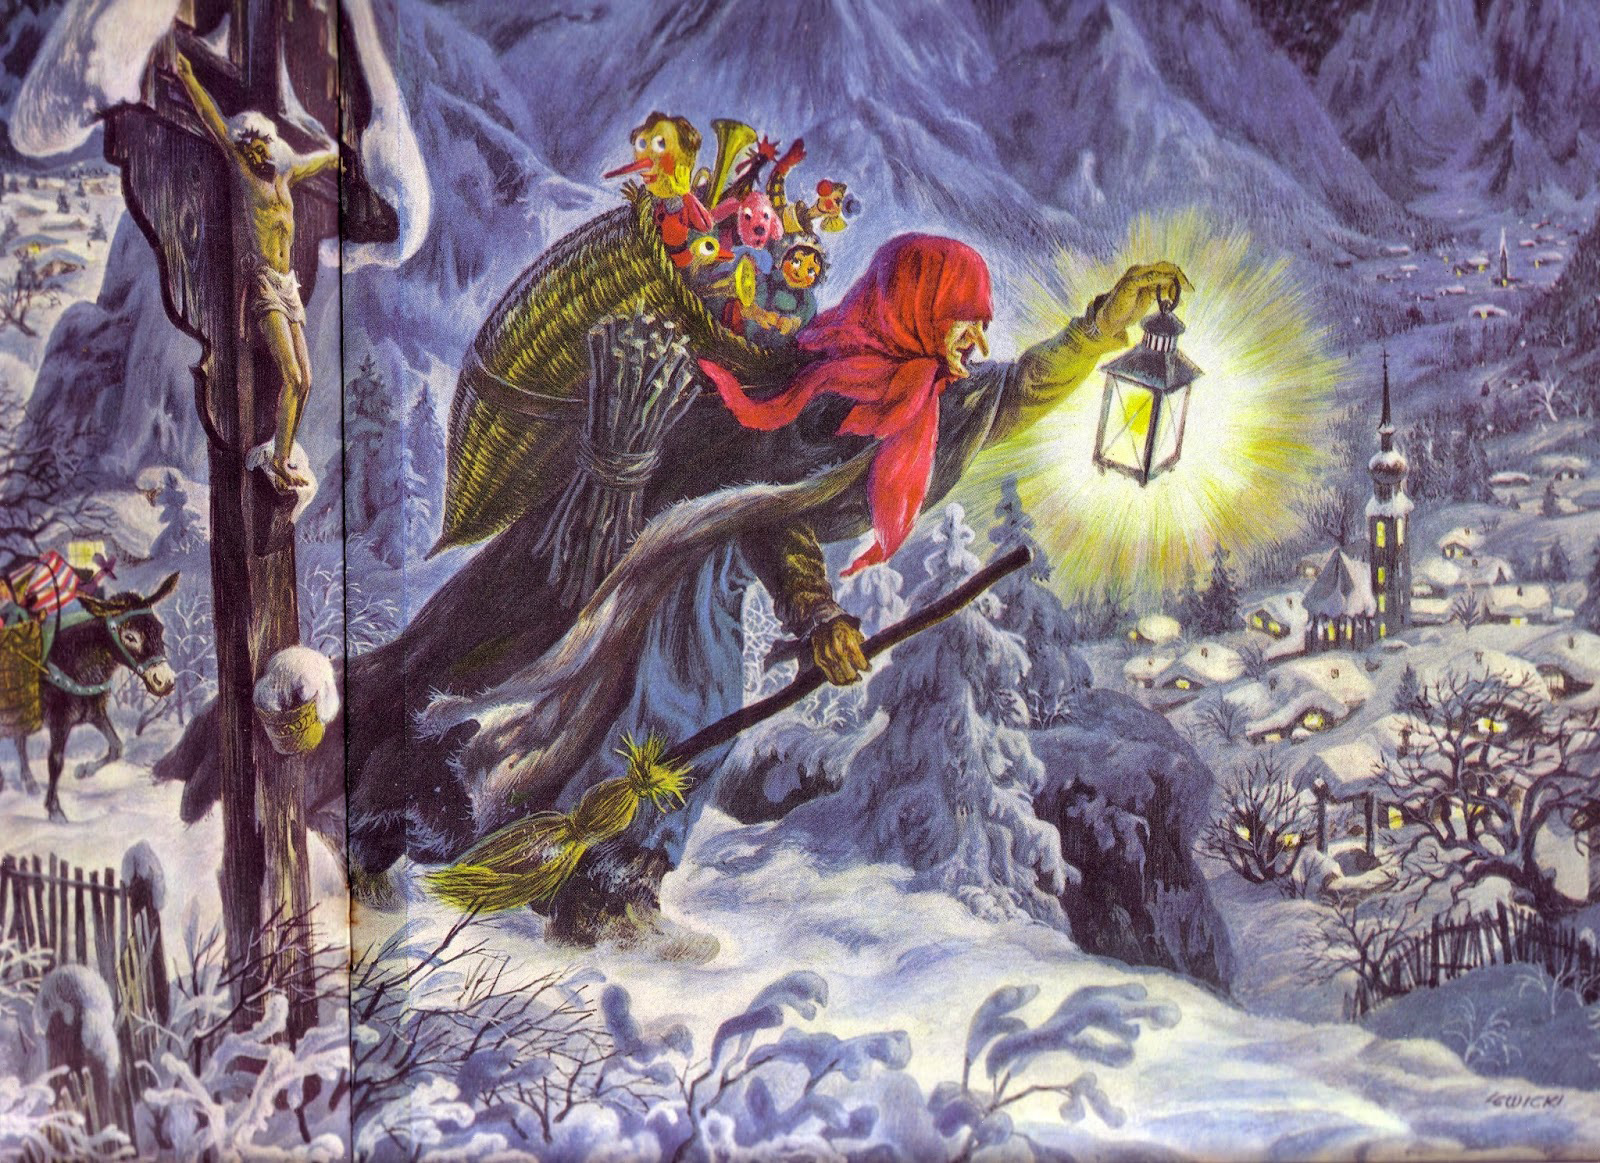 La Befana, the Italian Epiphany witch. Painting by James Lewicki, from “The Golden Book of Christmas Tales” 1956